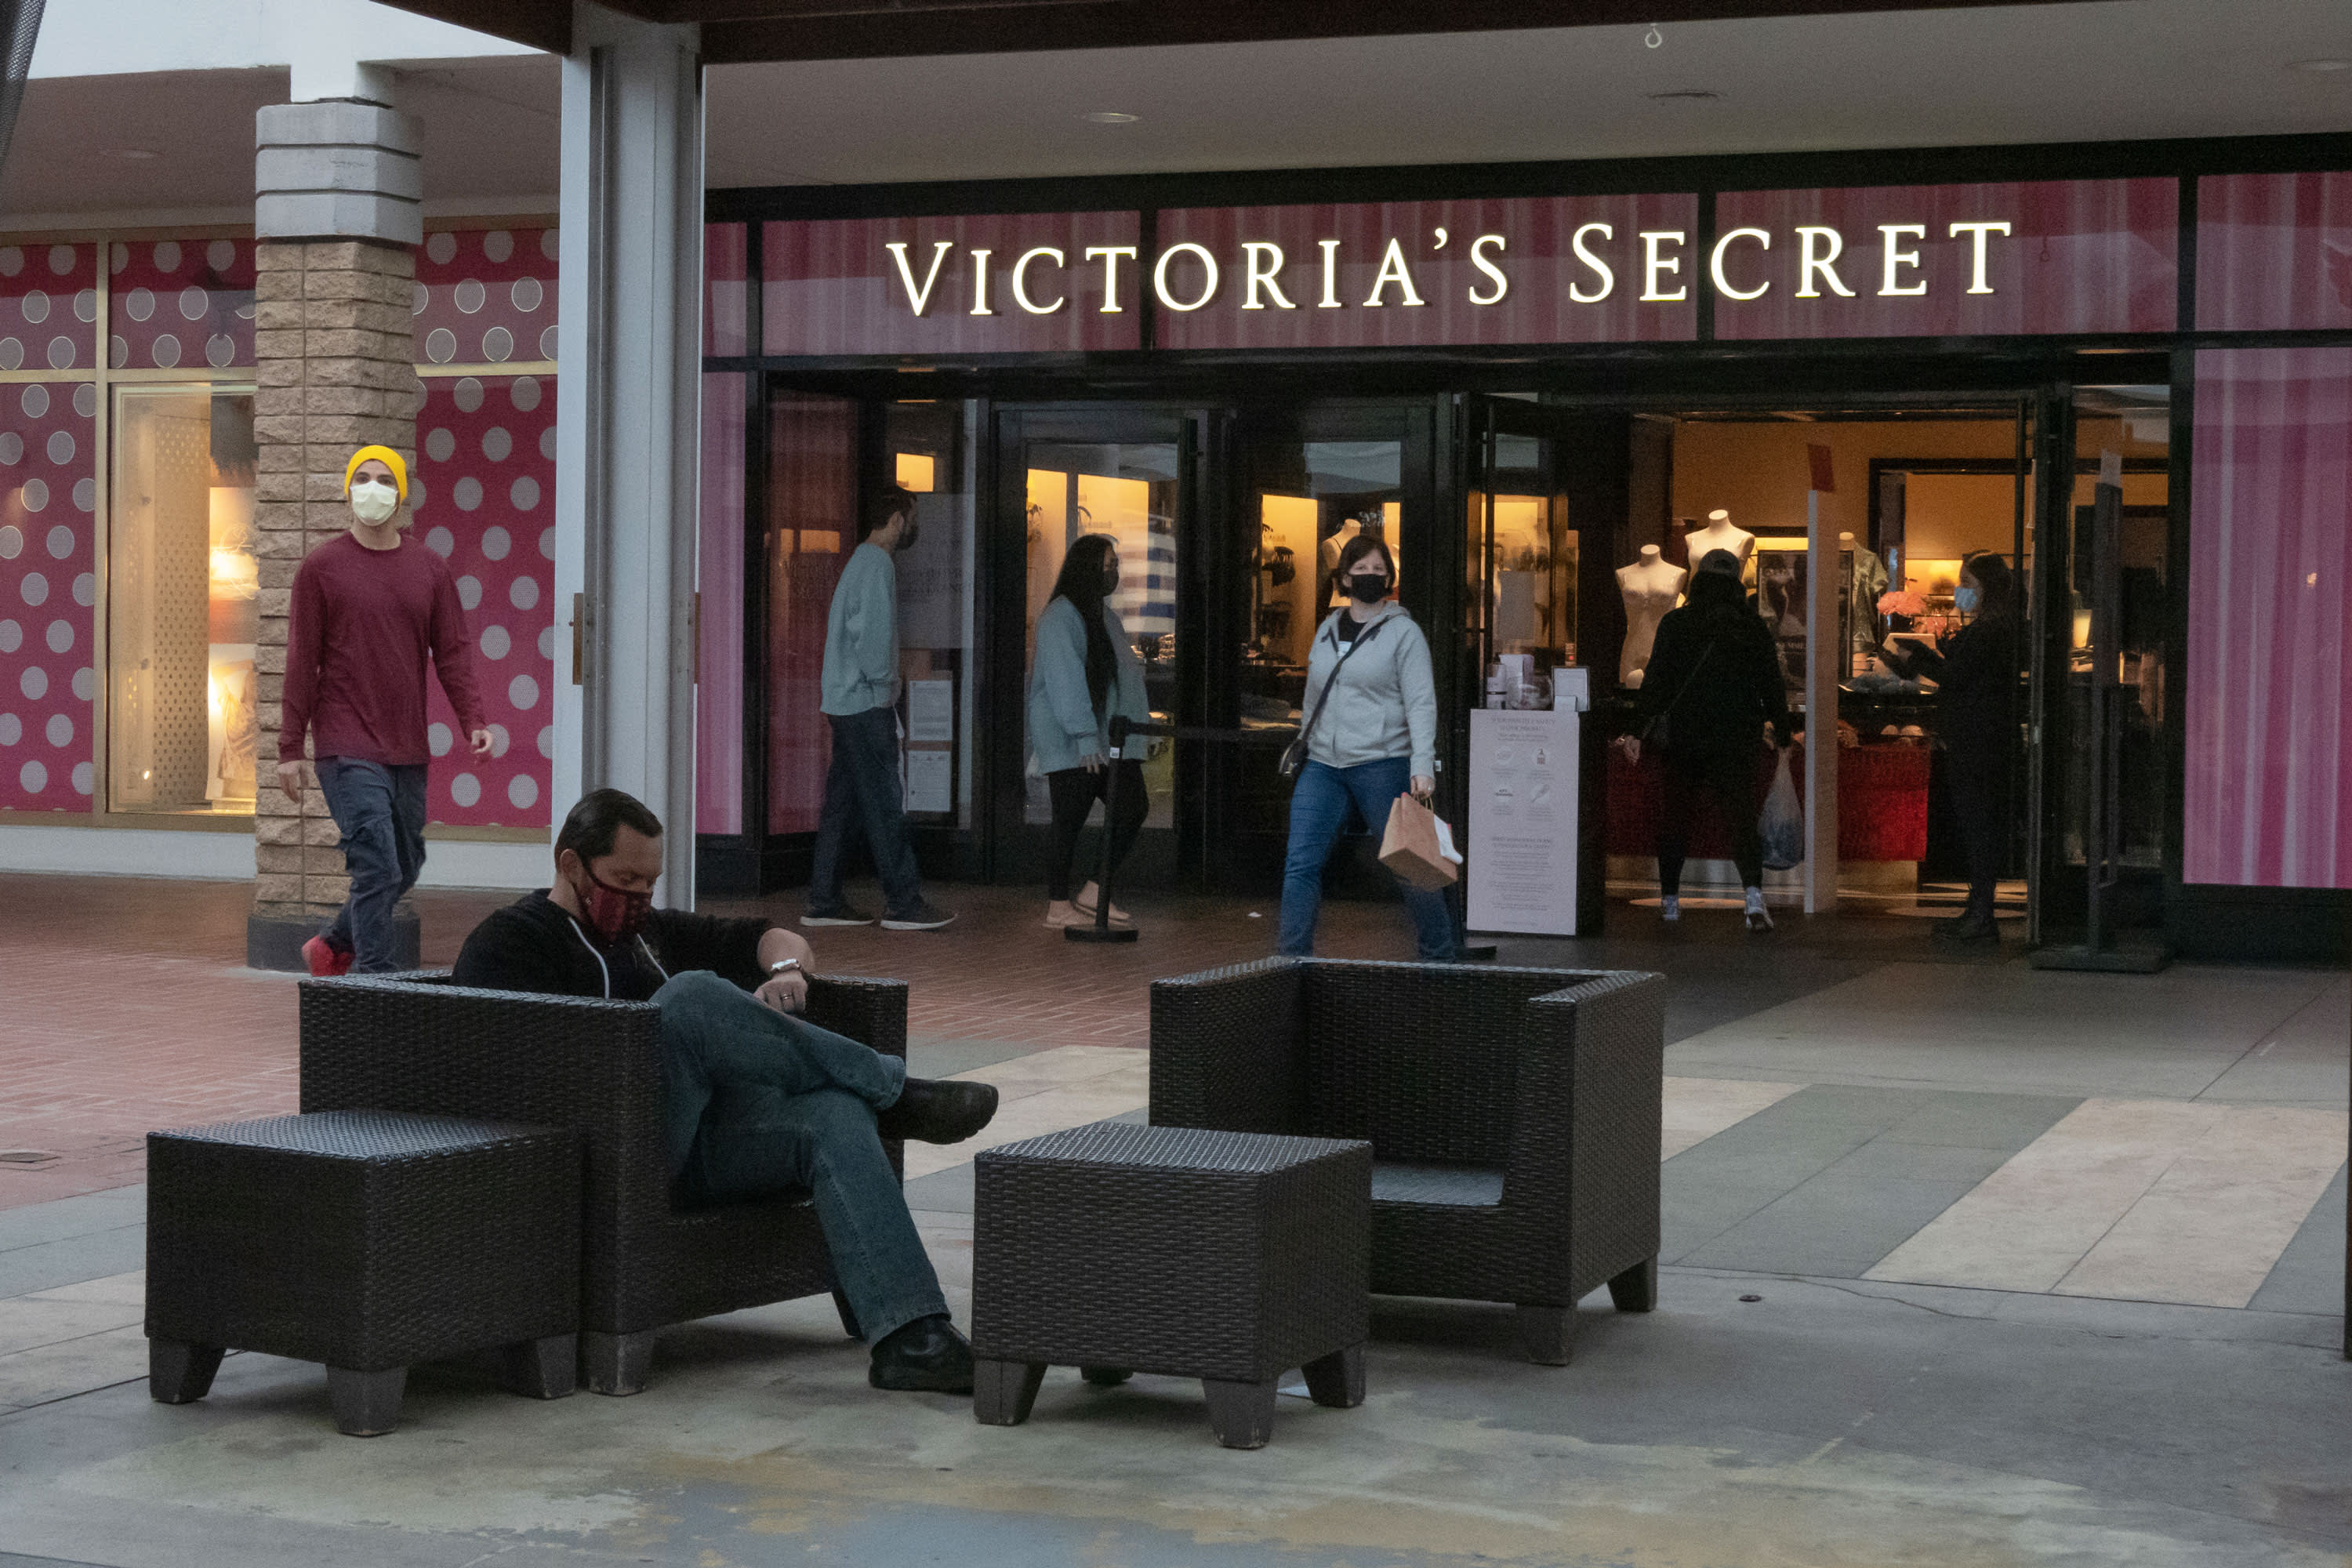 After a failed spin off, Victoria's Secret is focused on improving